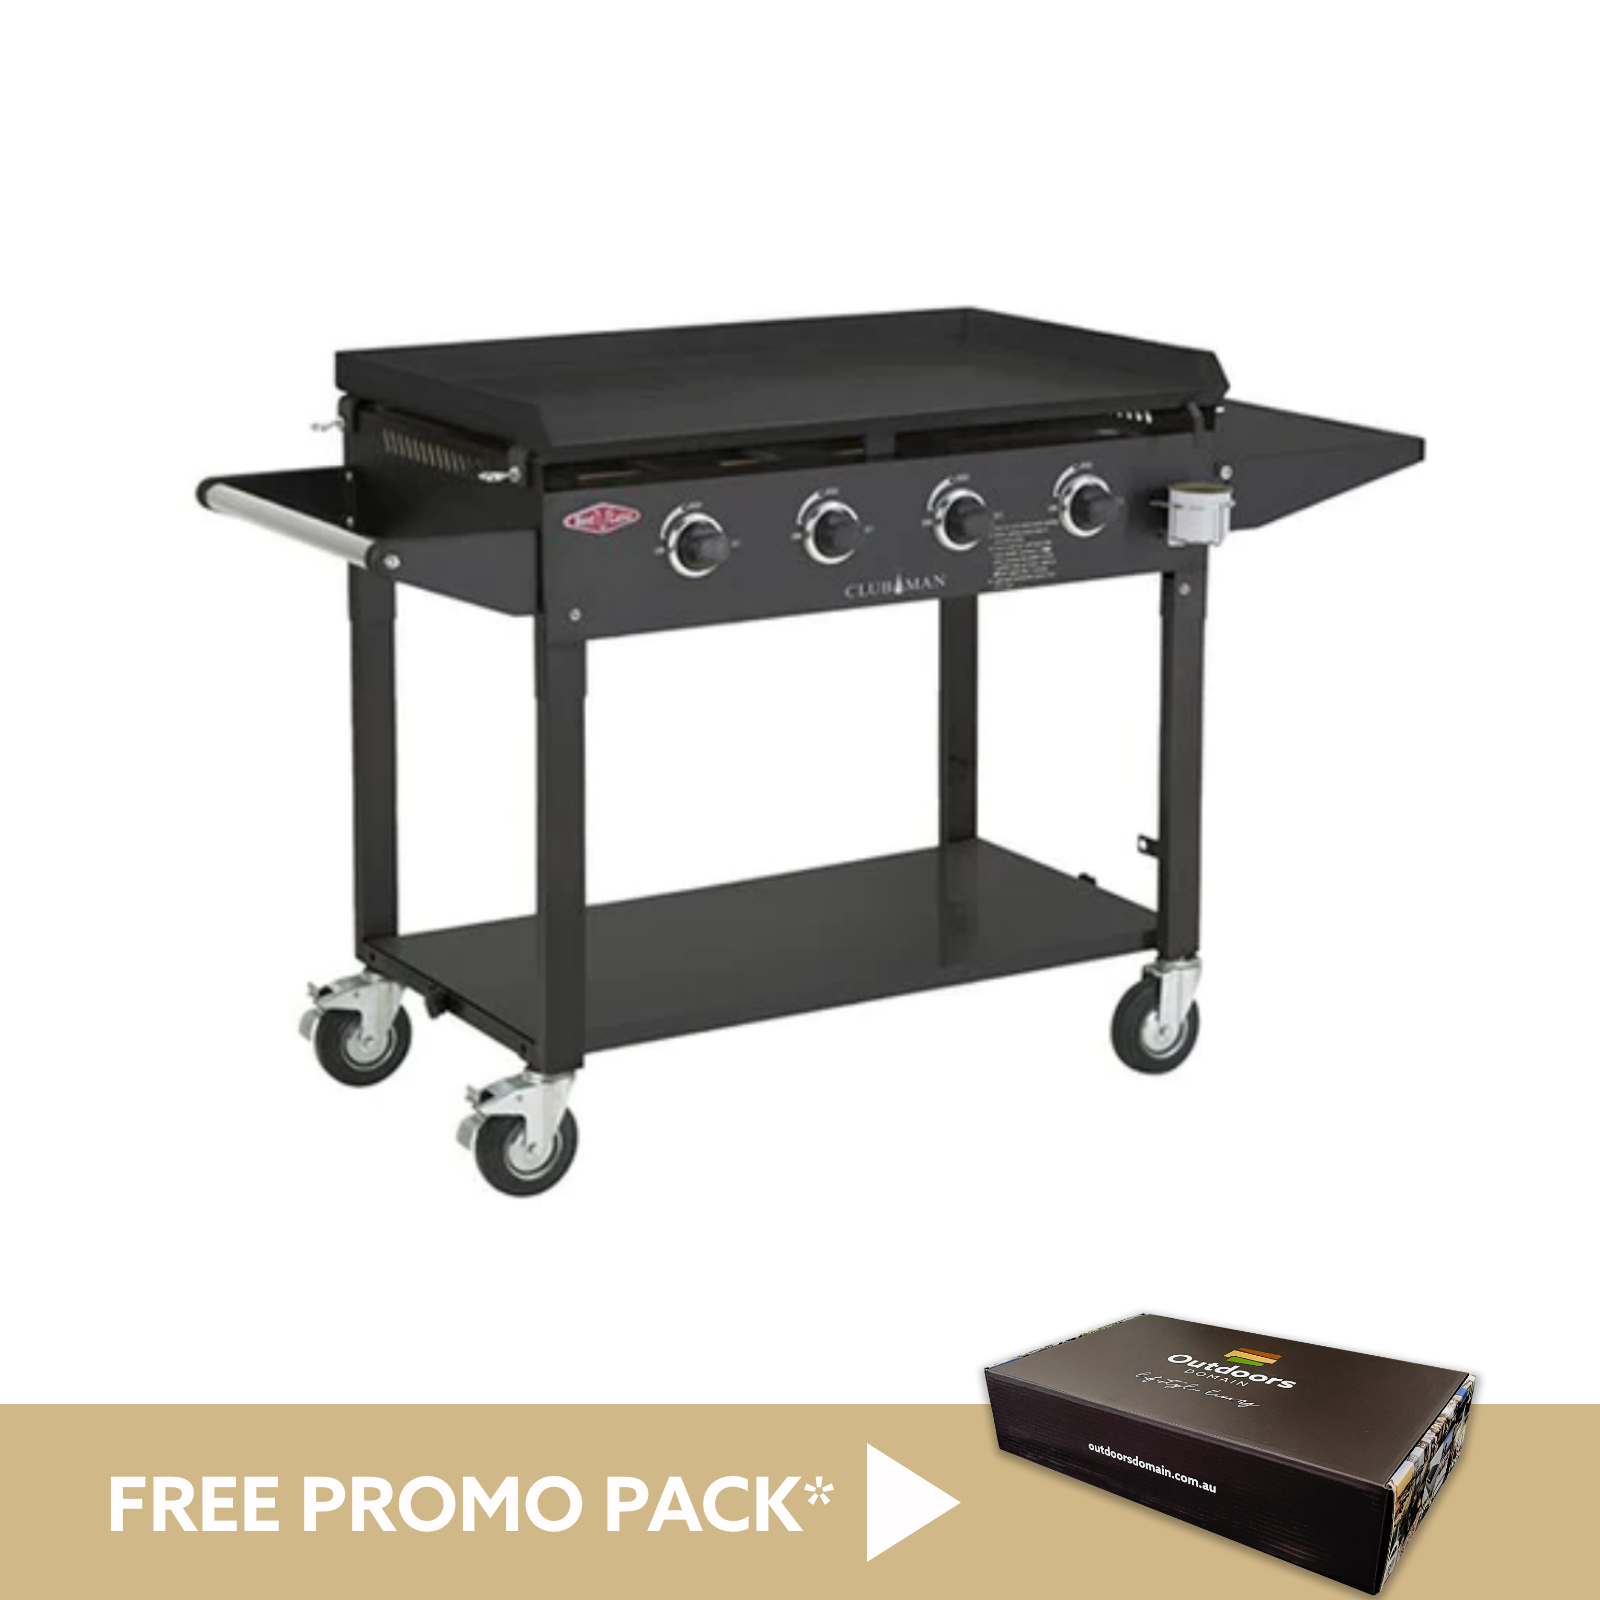 BeefEater Discovery Clubman 4 Burner BBQ with Lid